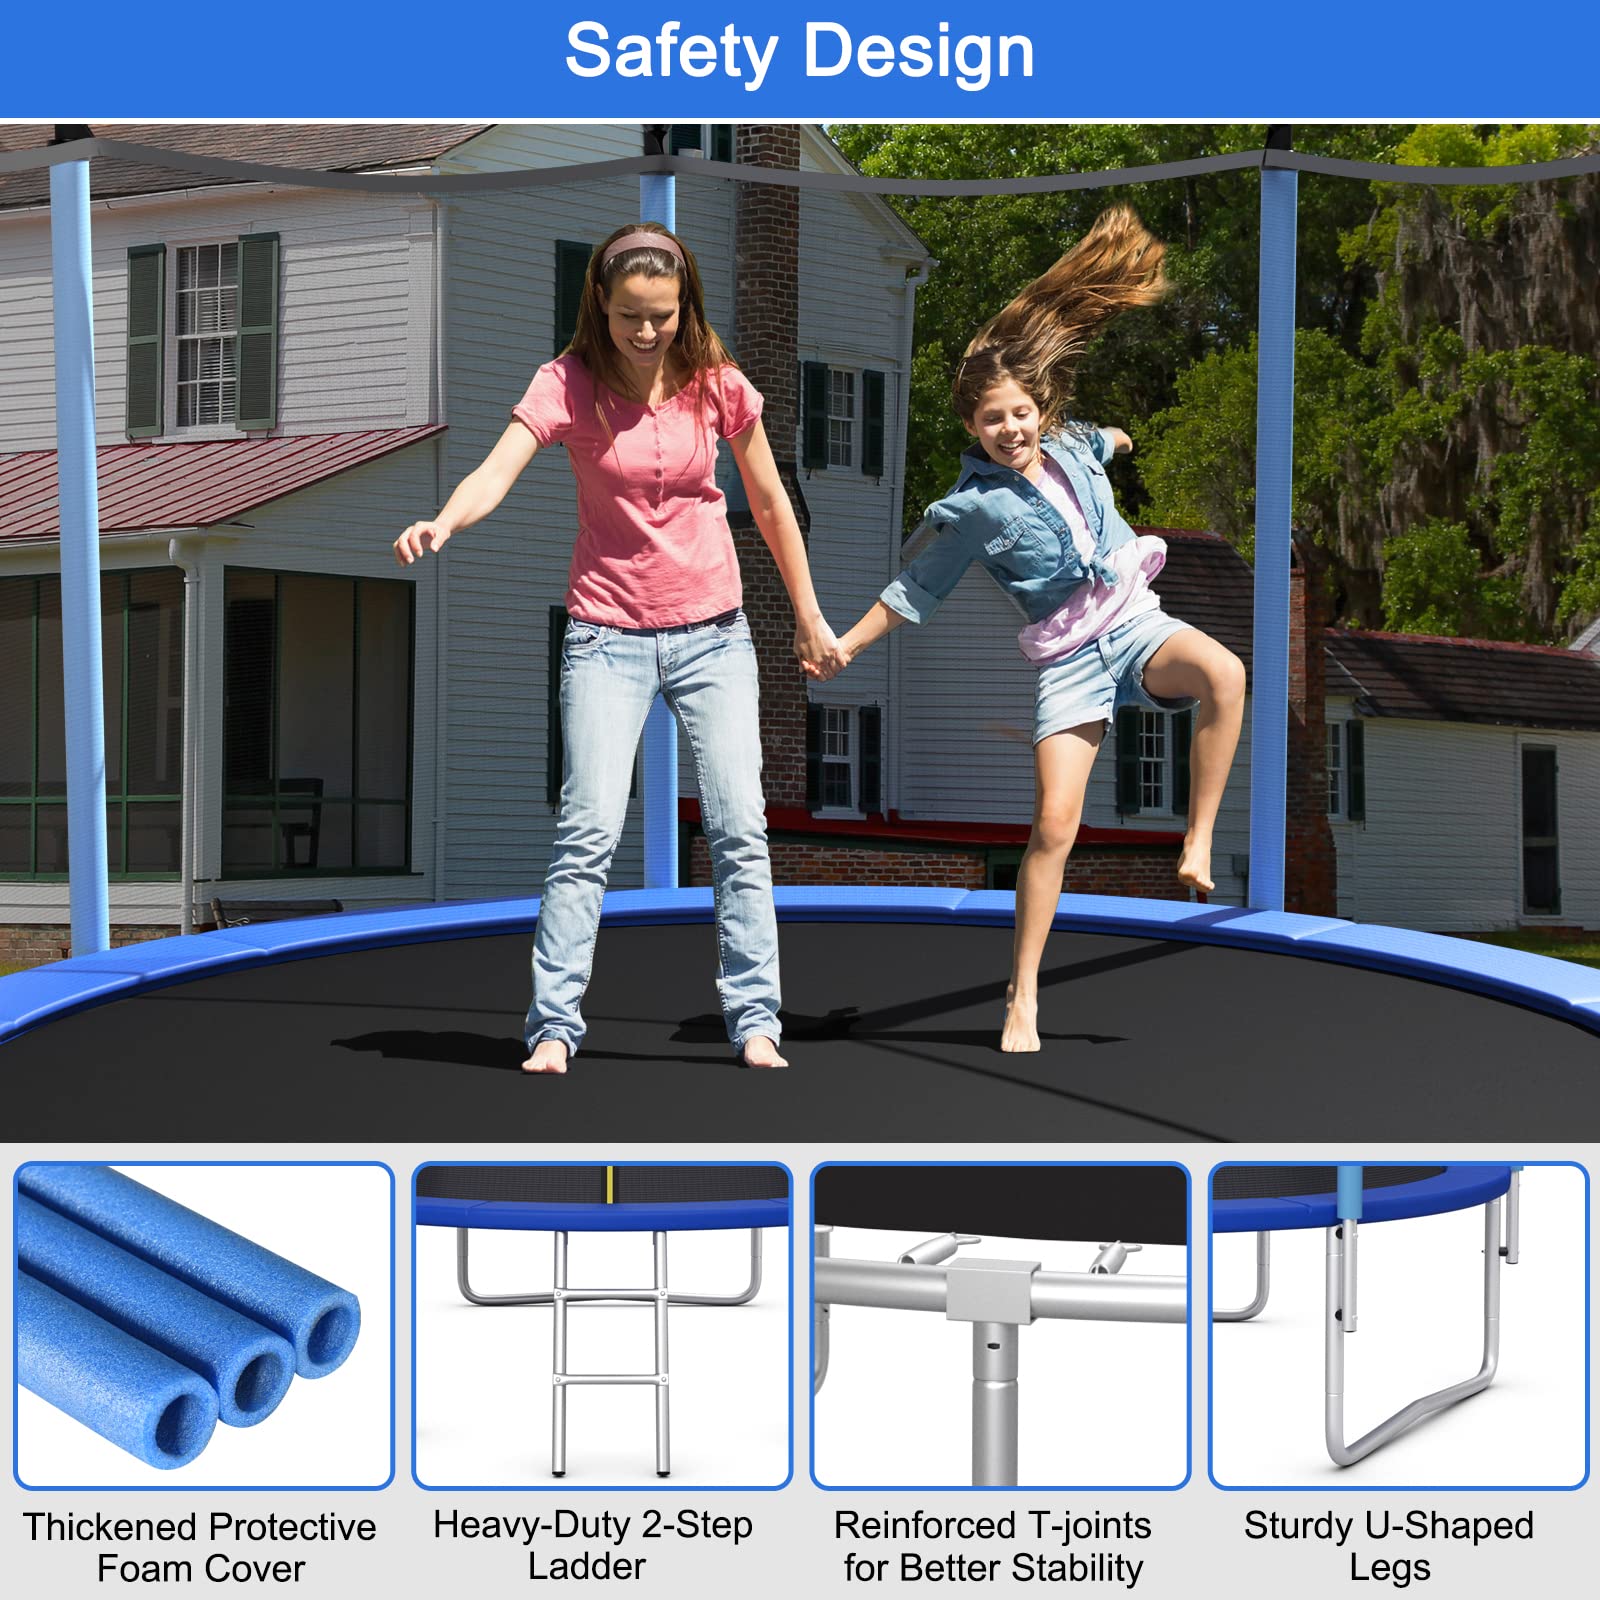 Giantex 8Ft 10Ft 12Ft 14Ft 15Ft 16Ft ASTM Certified Approved Recreational Trampolines